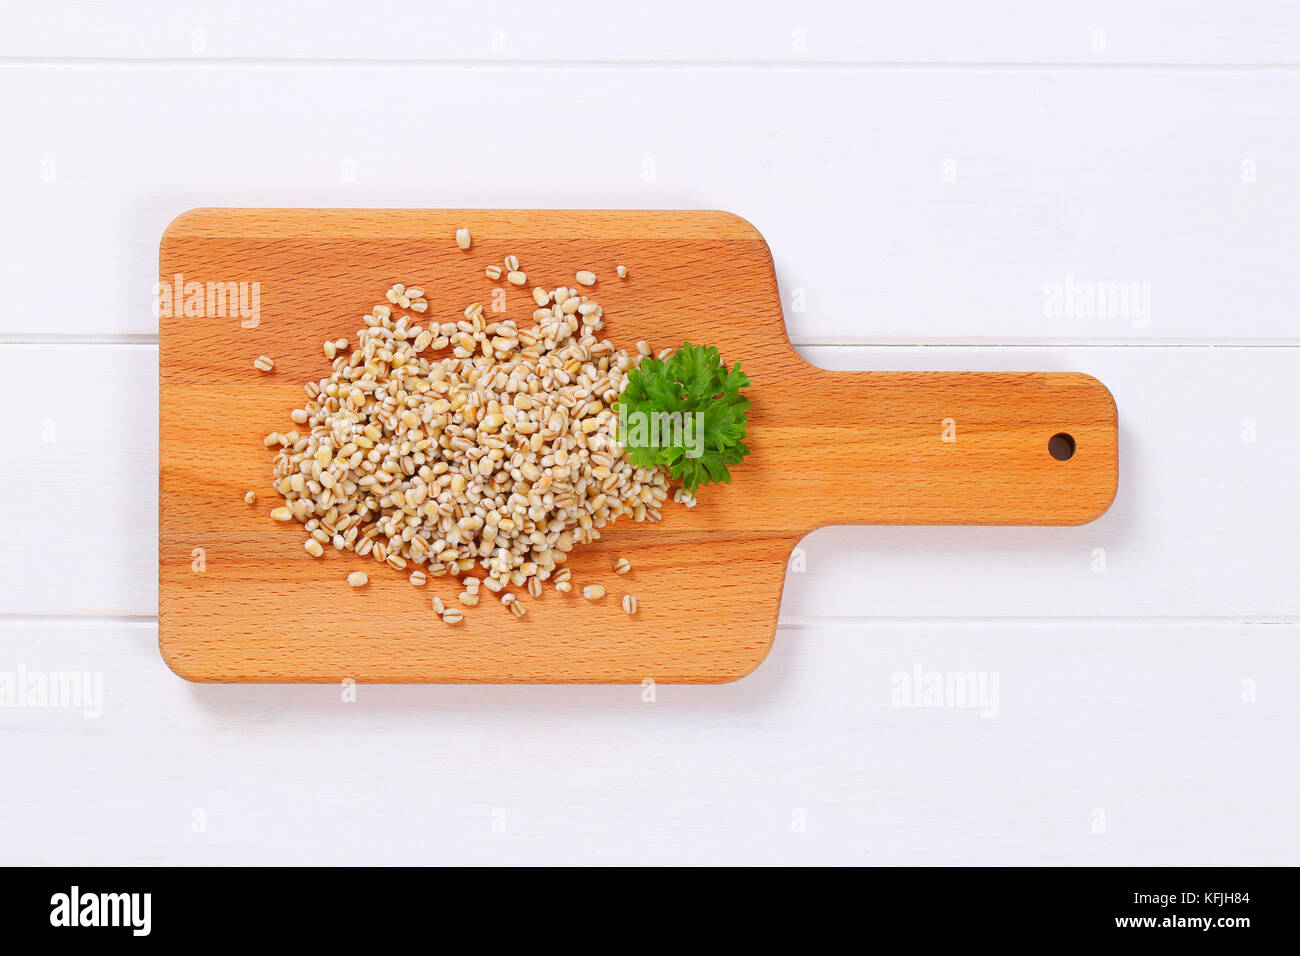 pile of cooked pearl barley on wooden cutting board Stock Photo